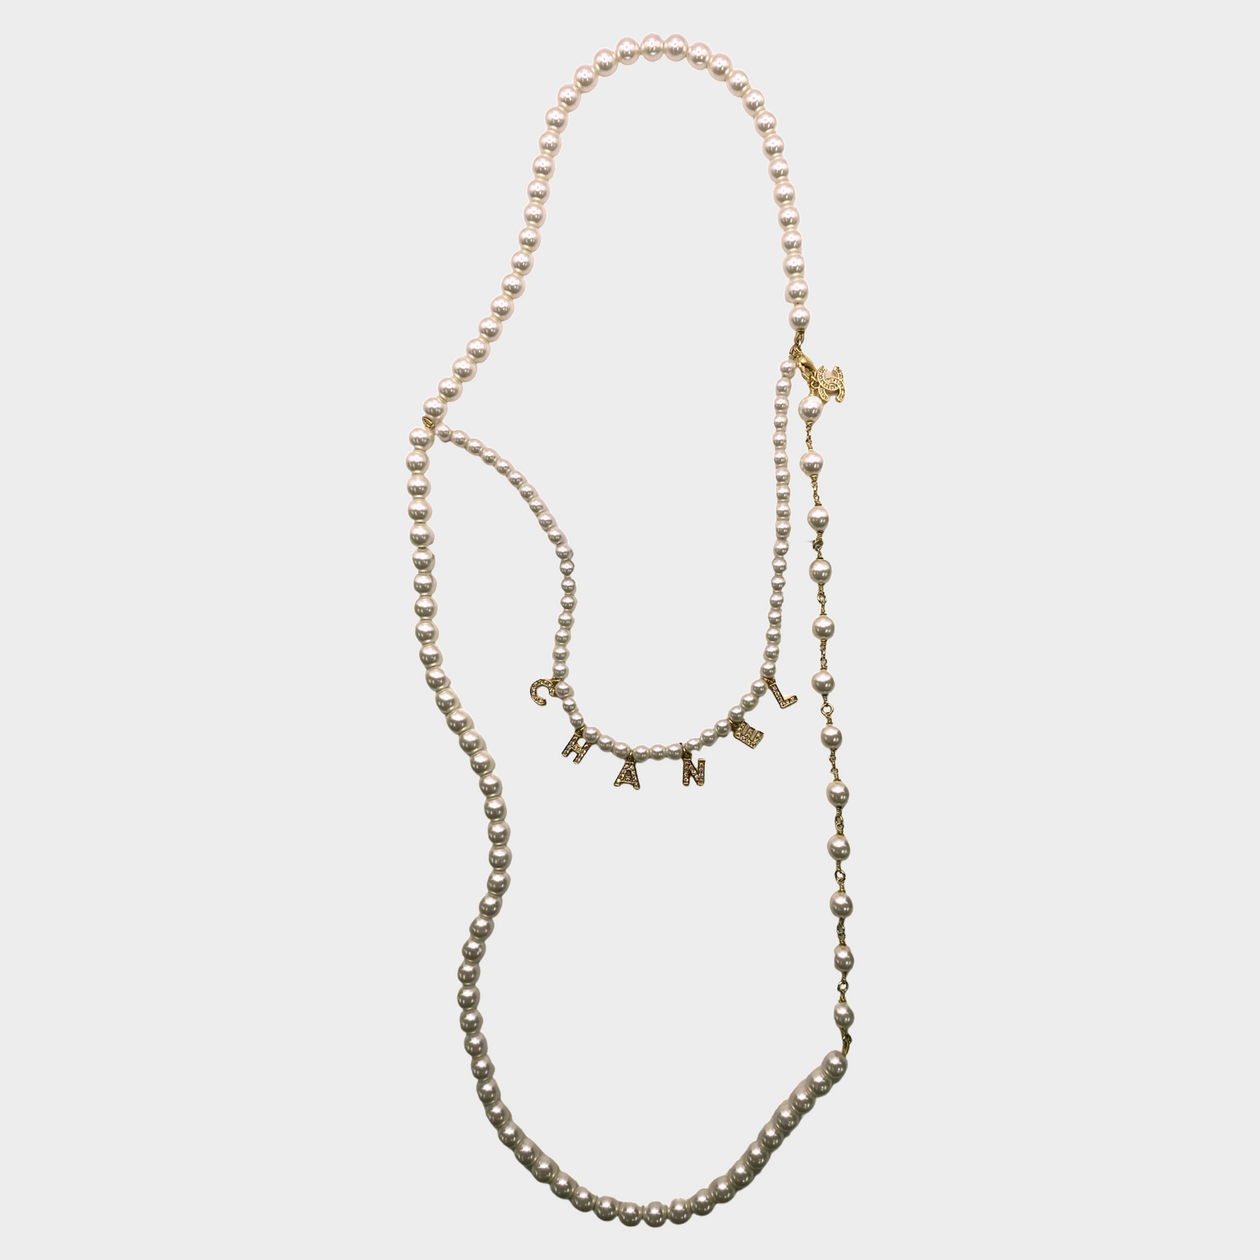 Chanel women's dual layer pearl necklace with diamante letter